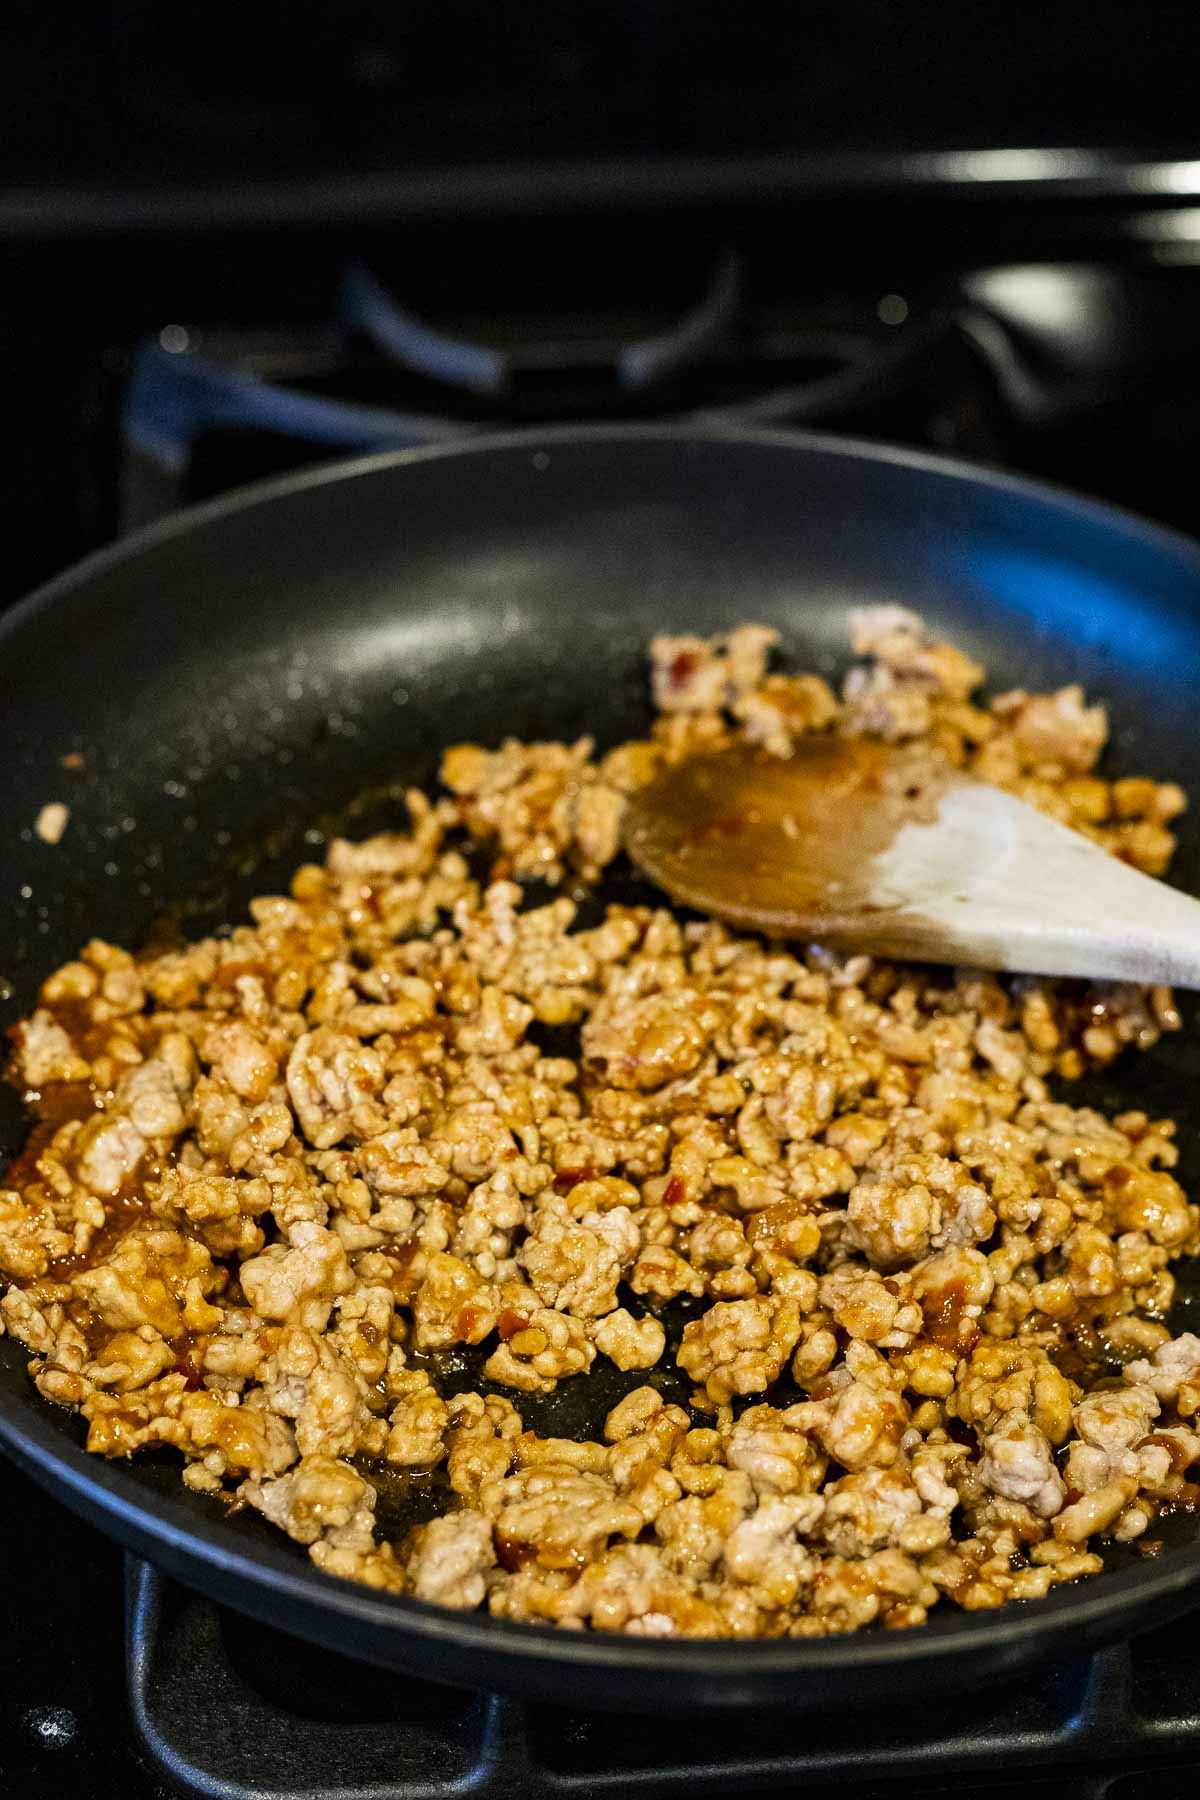 Ground pork cooking in a skillet on the stovetop.